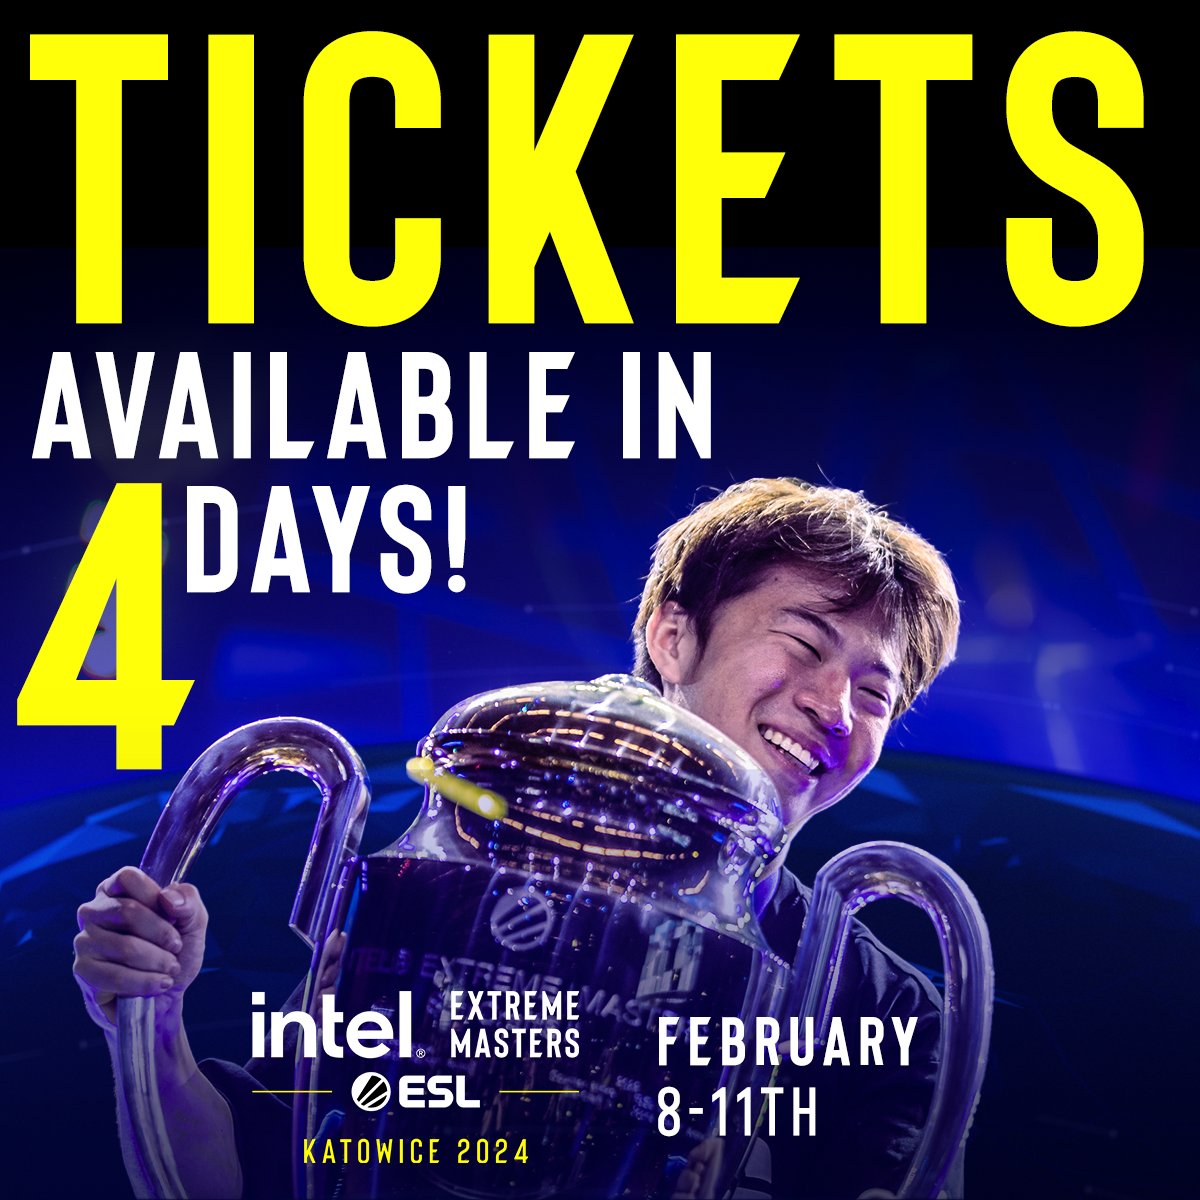 After a phenomenal CS:GO Major, Intel® Extreme Masters is set to